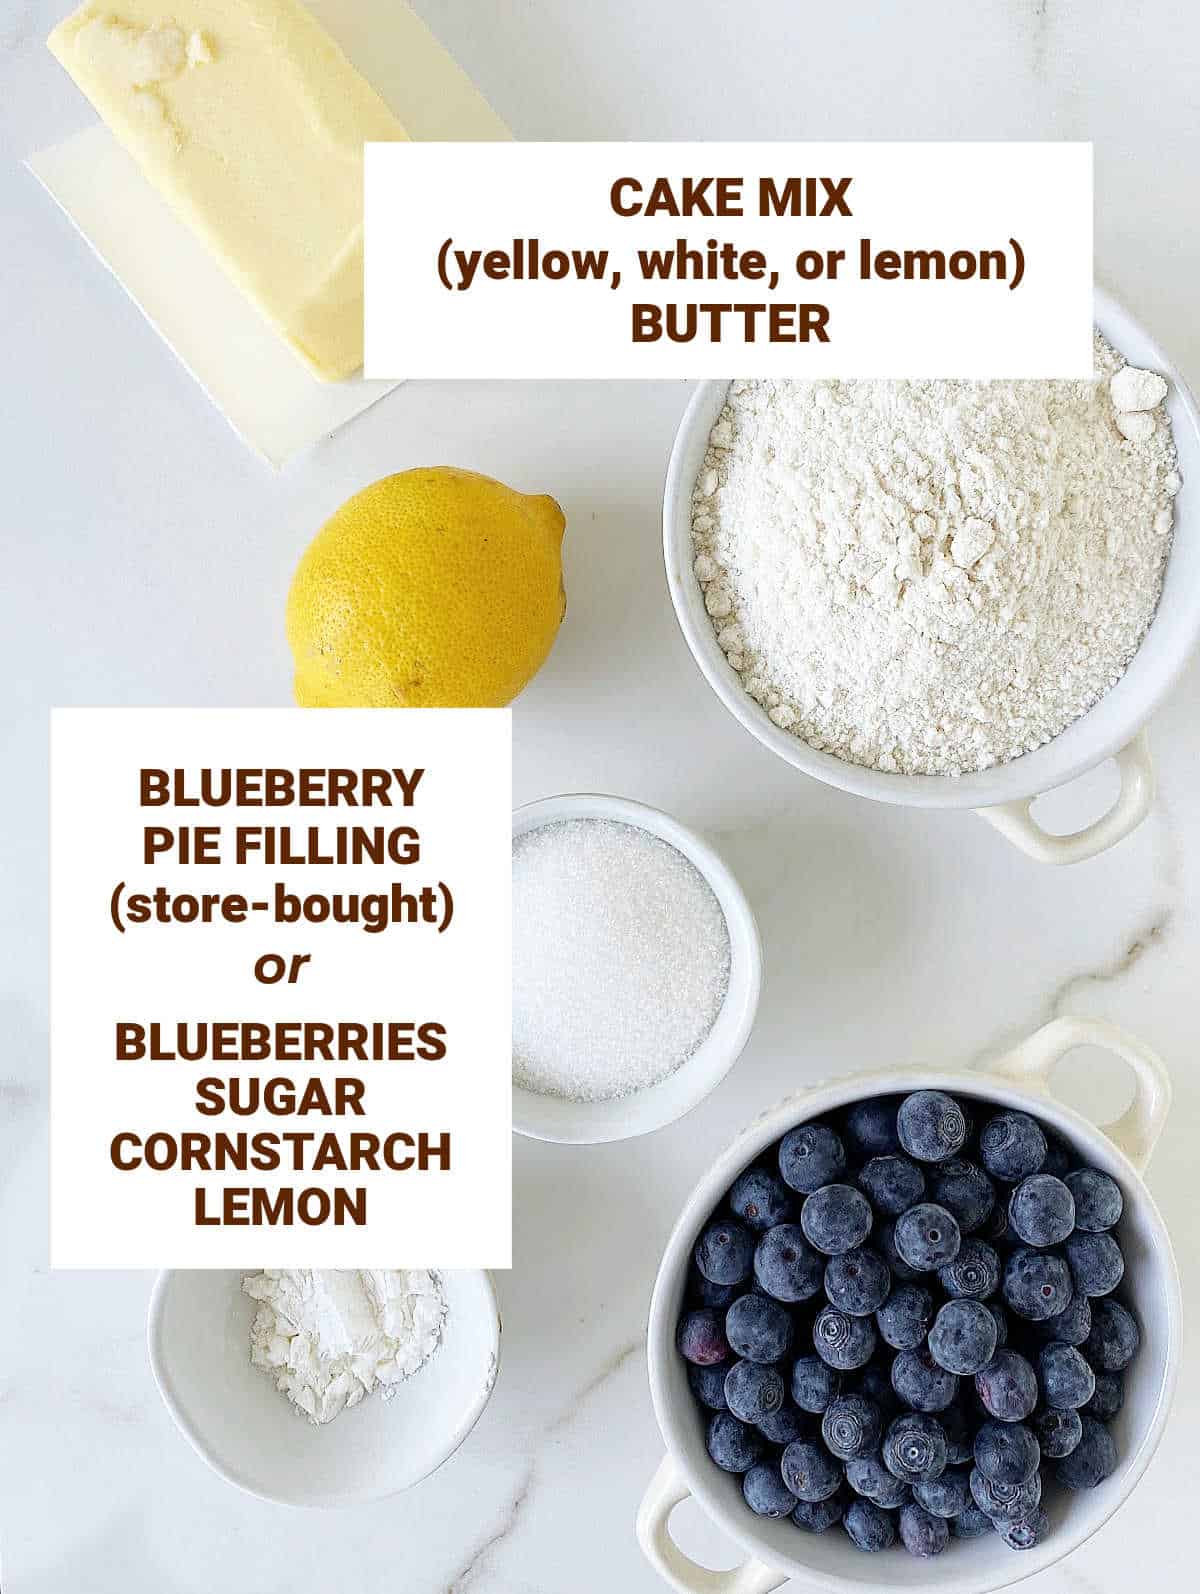 Bowls with ingredients for blueberry dessert including cake mix, lemon, sugar, butter. White surface; text overlay.